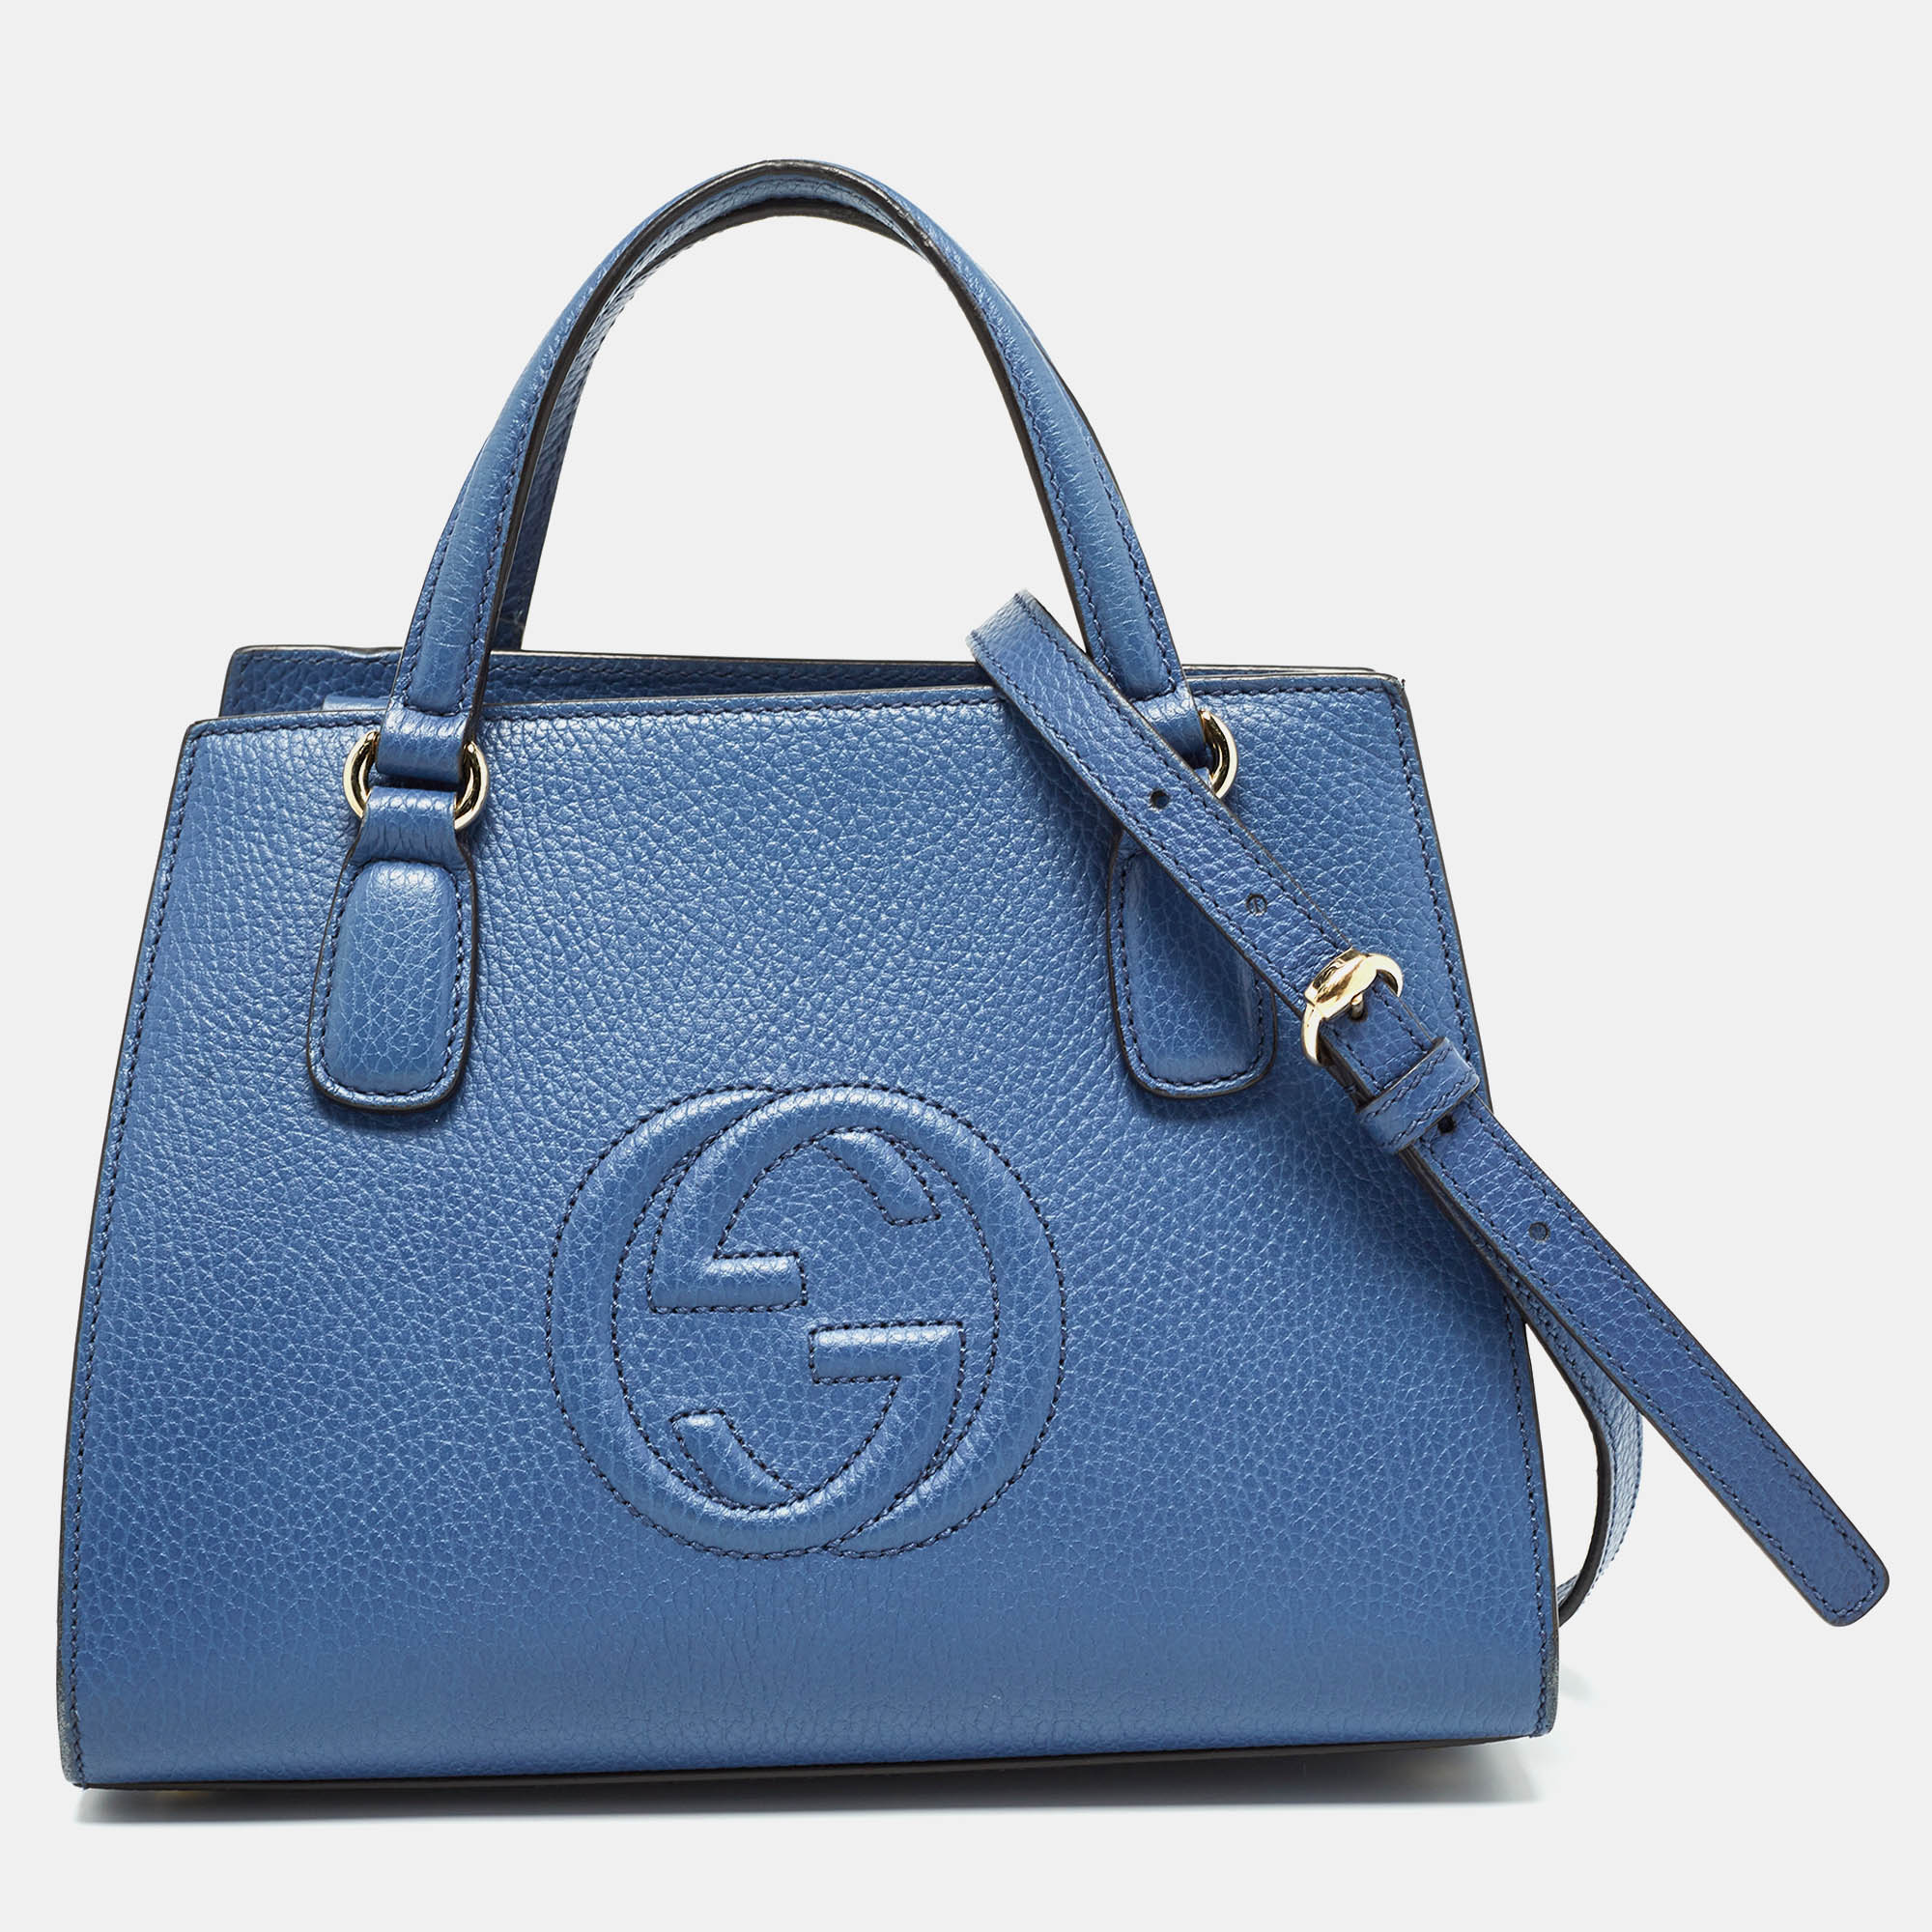 Gucci blue leather soho top handle bag